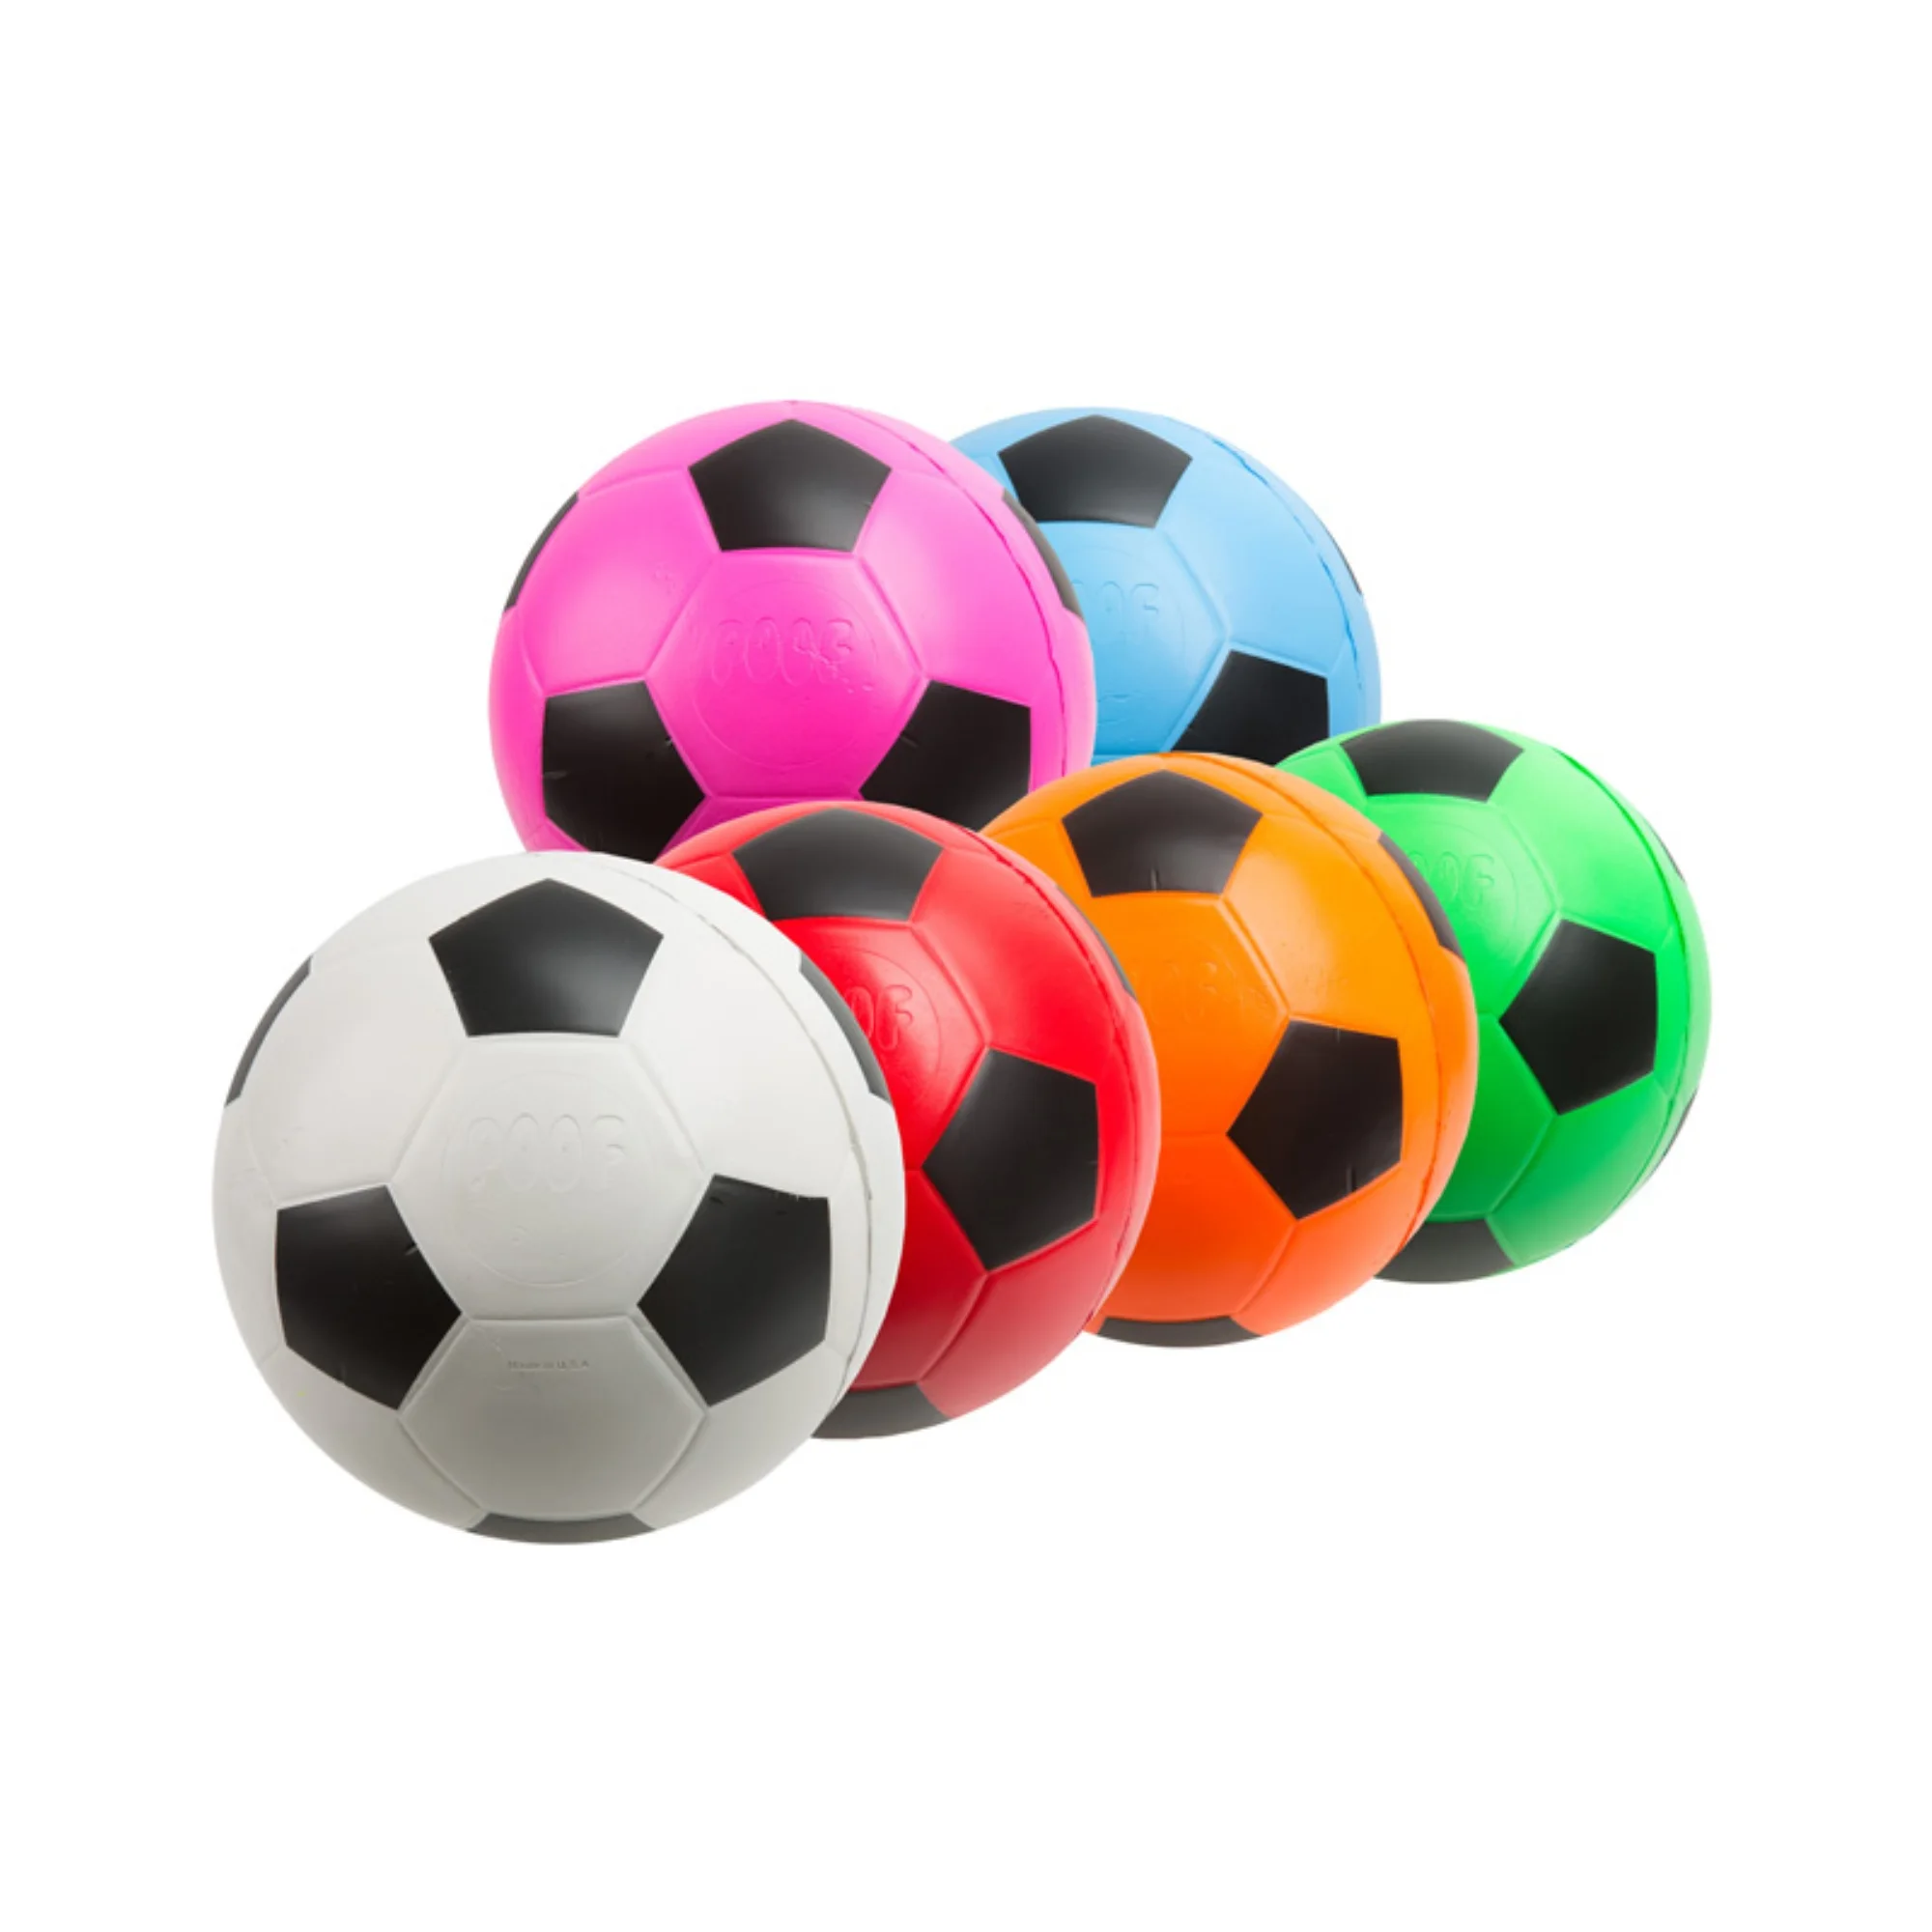 Stress Balls Stress Reliver Party Favor Soft PU Ball Random Pattern Novelty Squeeze Ball Release Stress for Pressure Relief